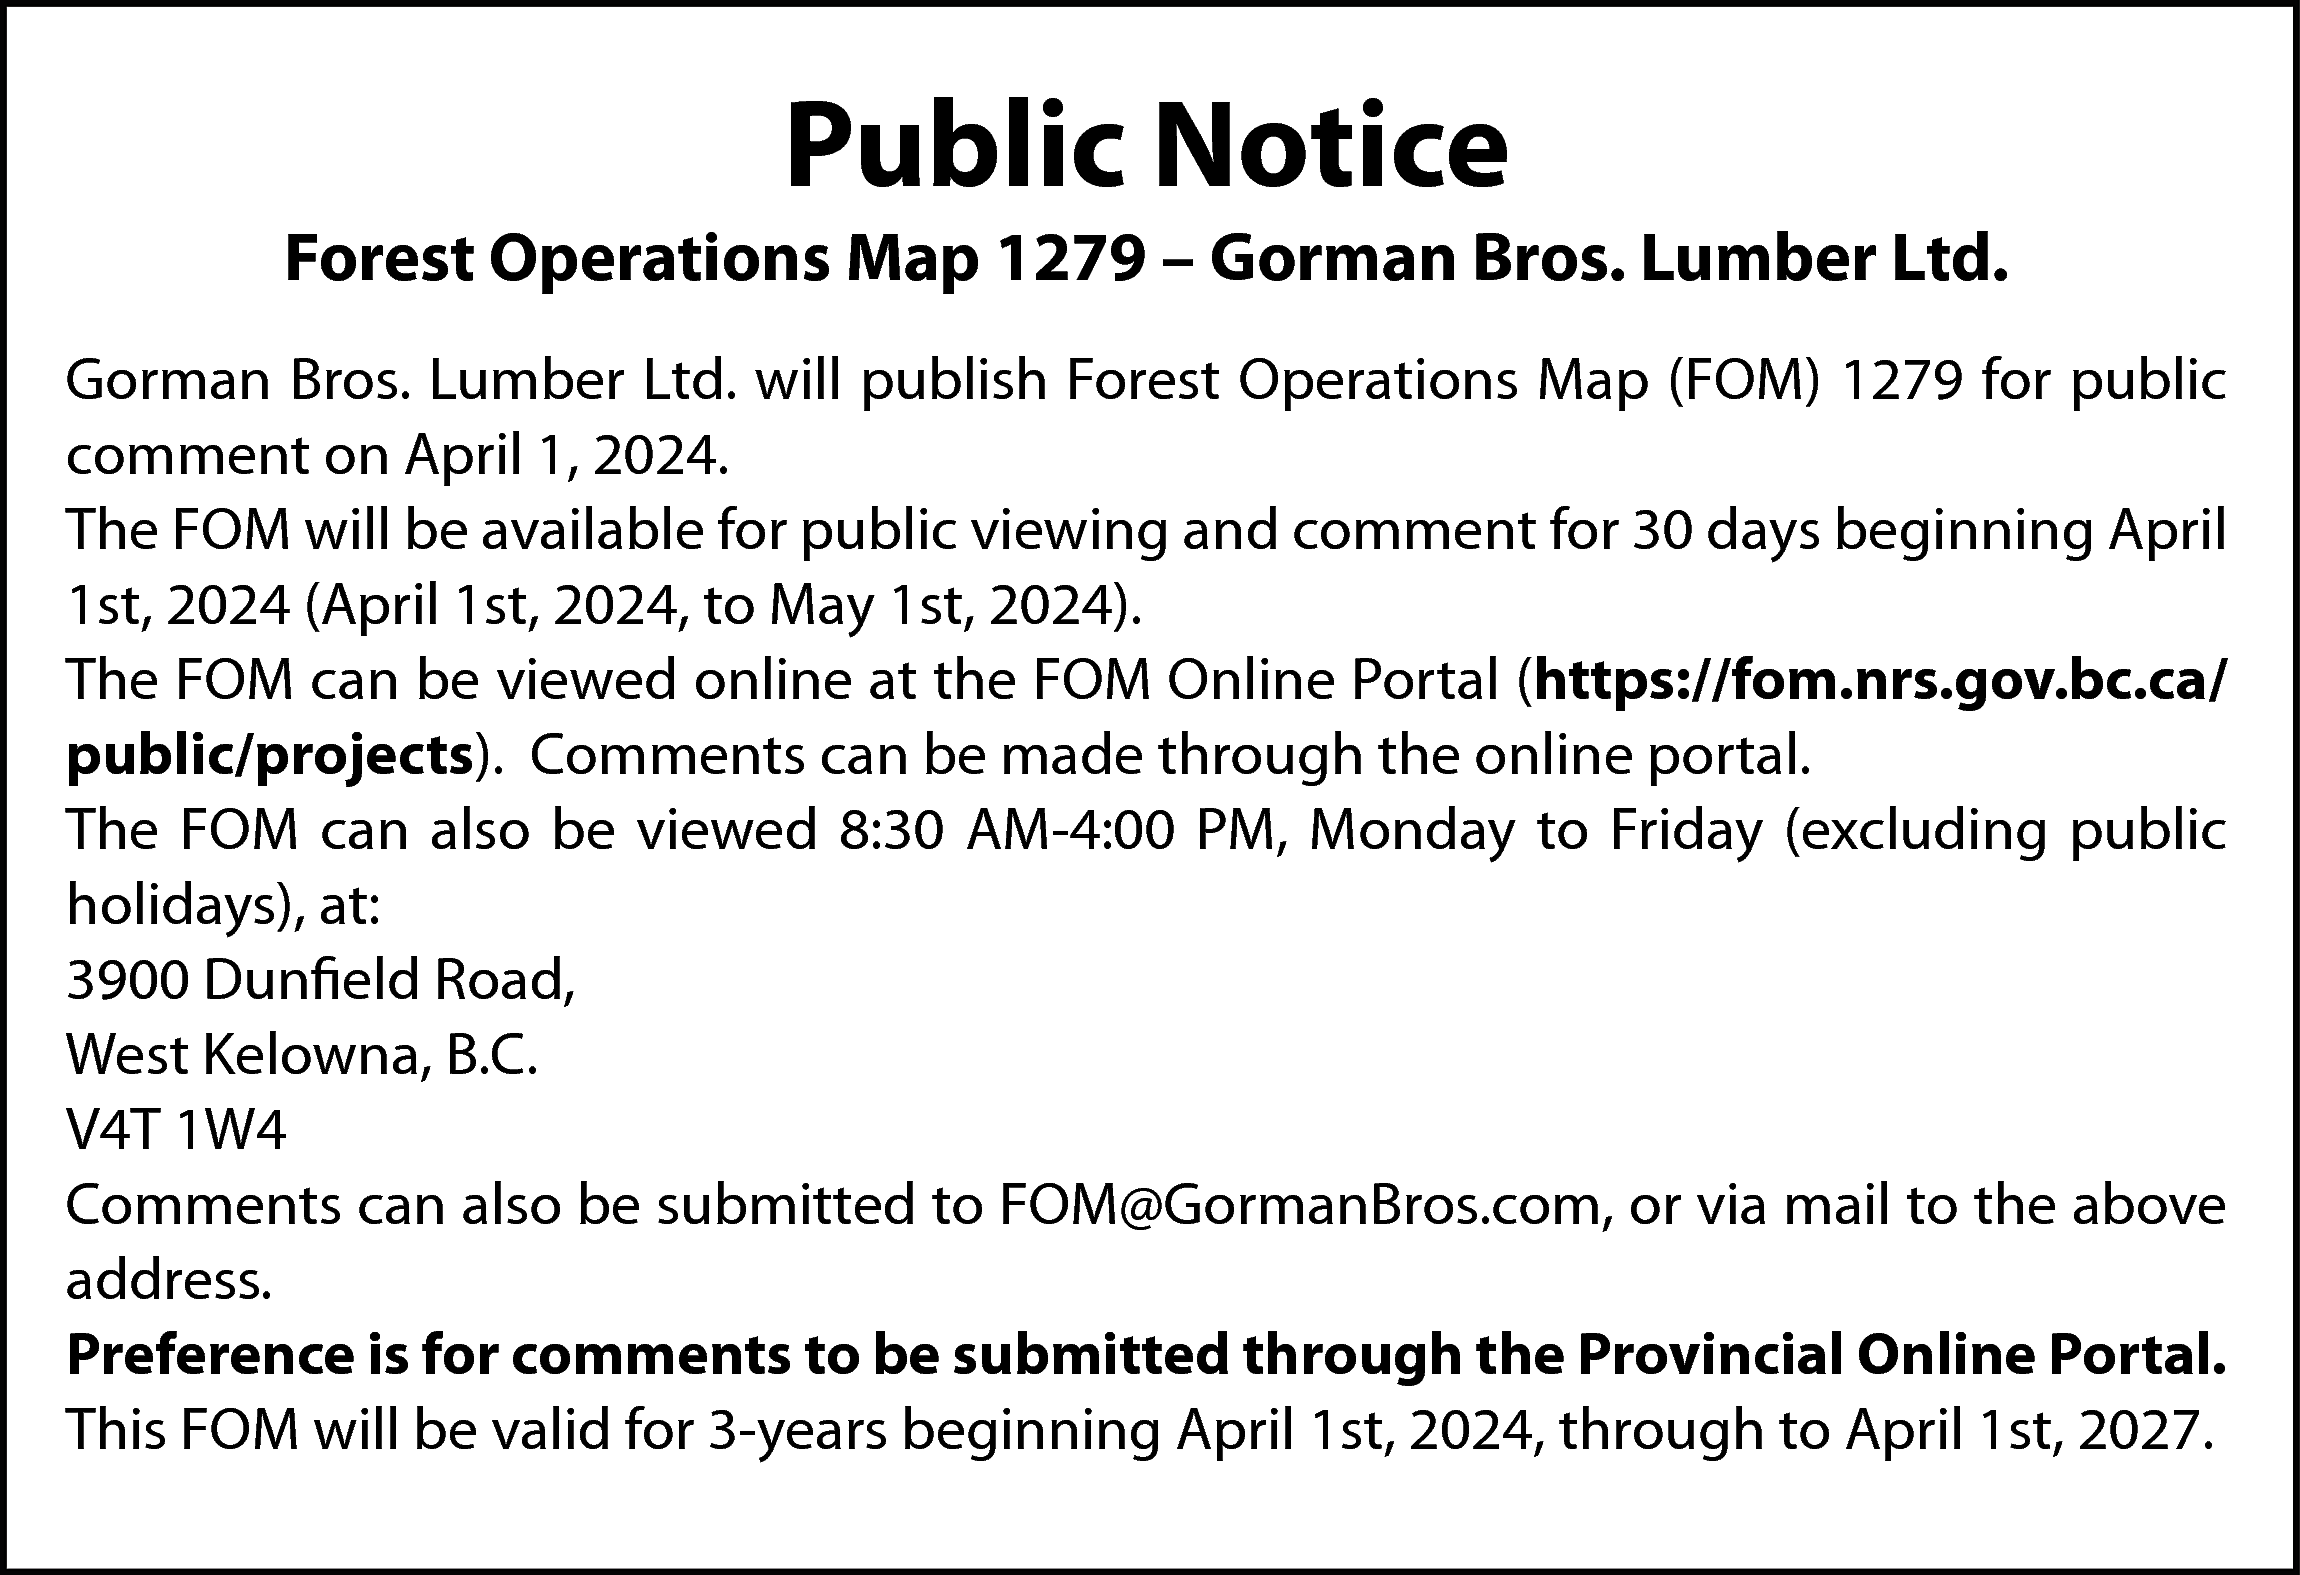 Public Notice <br> <br>Forest Operations  Public Notice    Forest Operations Map 1279 – Gorman Bros. Lumber Ltd.  Gorman Bros. Lumber Ltd. will publish Forest Operations Map (FOM) 1279 for public  comment on April 1, 2024.  The FOM will be available for public viewing and comment for 30 days beginning April  1st, 2024 (April 1st, 2024, to May 1st, 2024).  The FOM can be viewed online at the FOM Online Portal (https://fom.nrs.gov.bc.ca/  public/projects). Comments can be made through the online portal.  The FOM can also be viewed 8:30 AM-4:00 PM, Monday to Friday (excluding public  holidays), at:  3900 Dunfield Road,  West Kelowna, B.C.  V4T 1W4  Comments can also be submitted to FOM@GormanBros.com, or via mail to the above  address.  Preference is for comments to be submitted through the Provincial Online Portal.  This FOM will be valid for 3-years beginning April 1st, 2024, through to April 1st, 2027.    